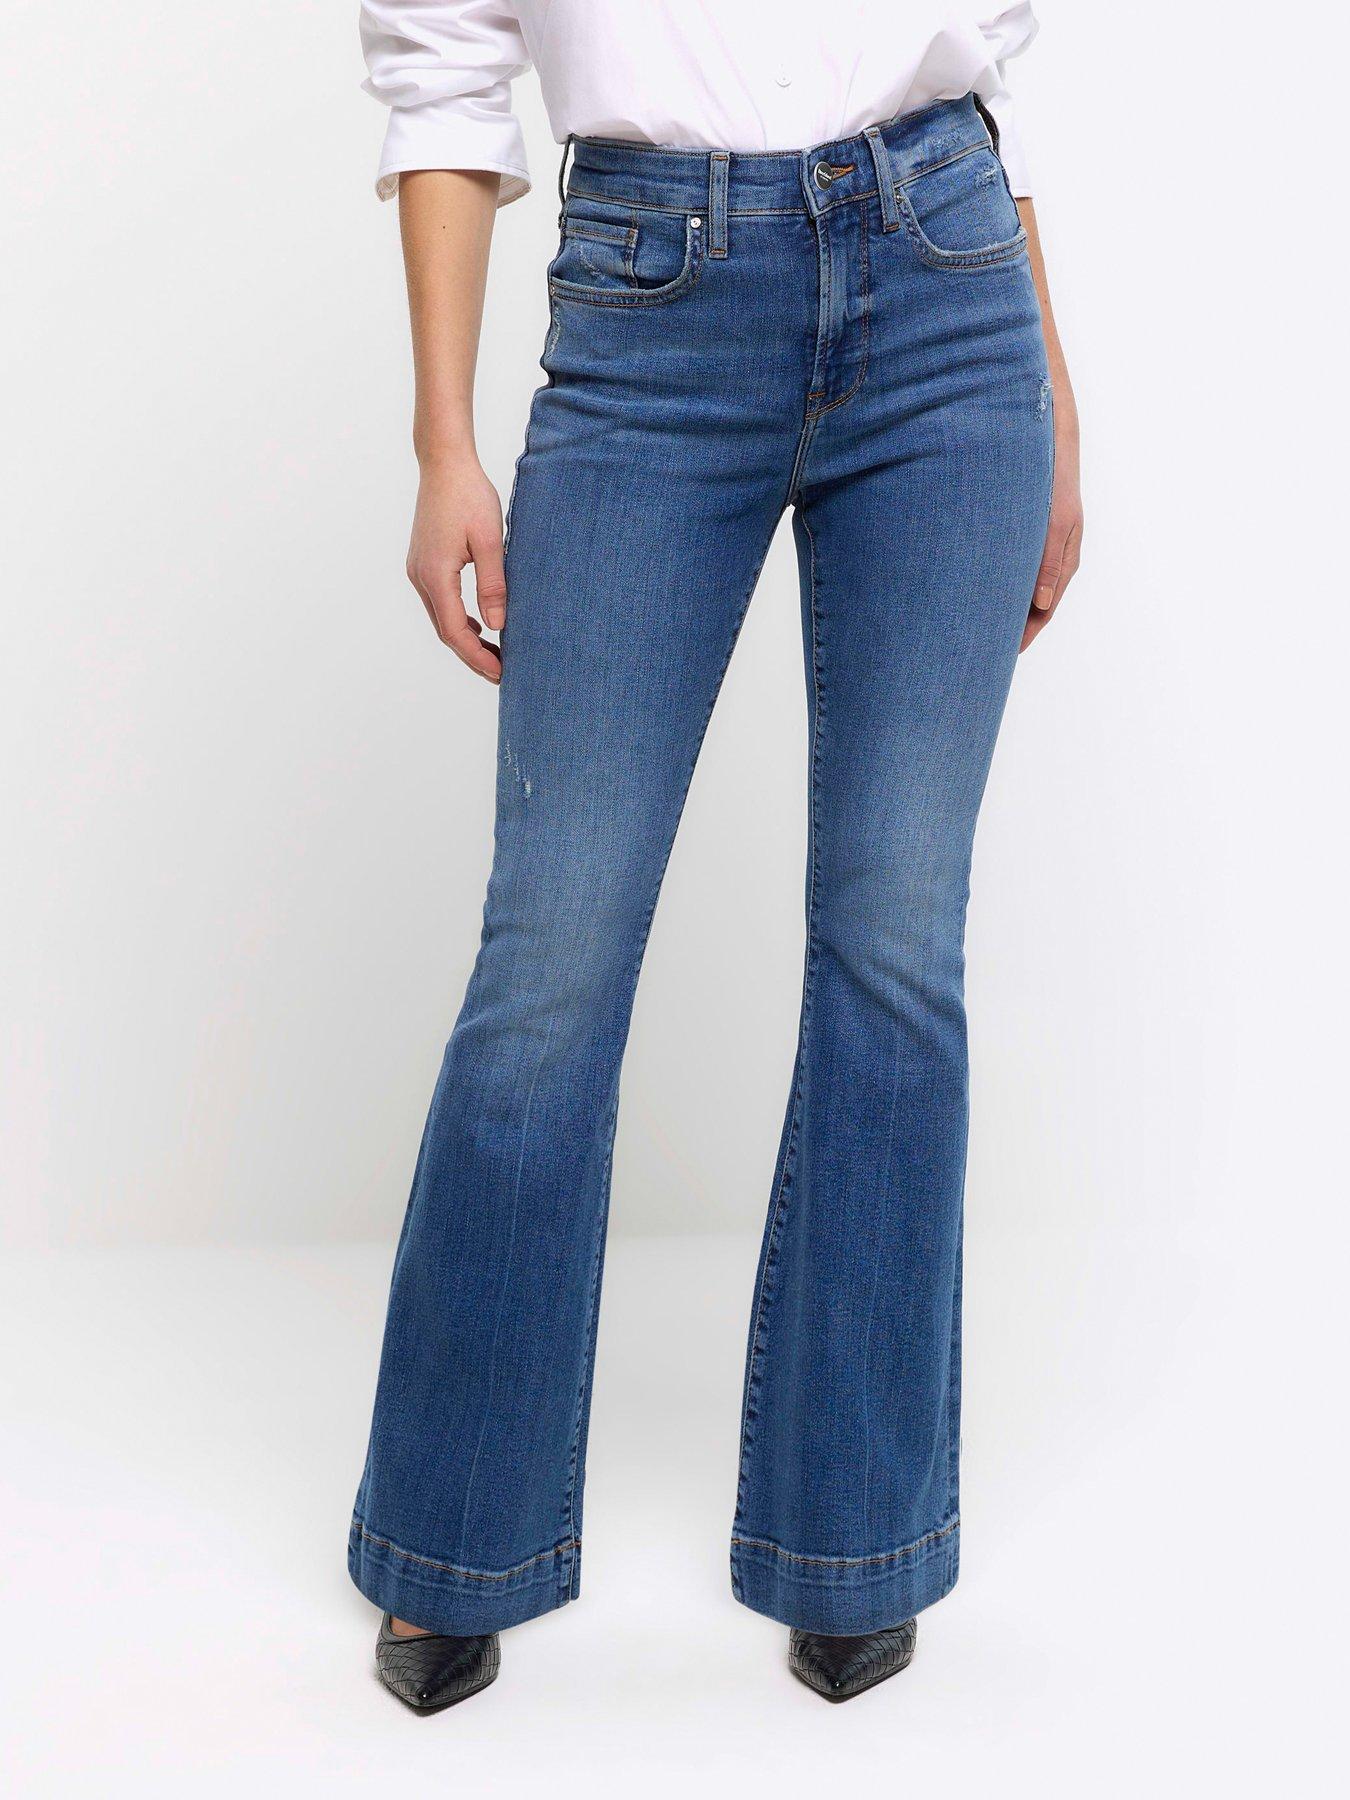 Women's High-Rise Ripped Medium Wash Flare Jeans, Women's Bottoms